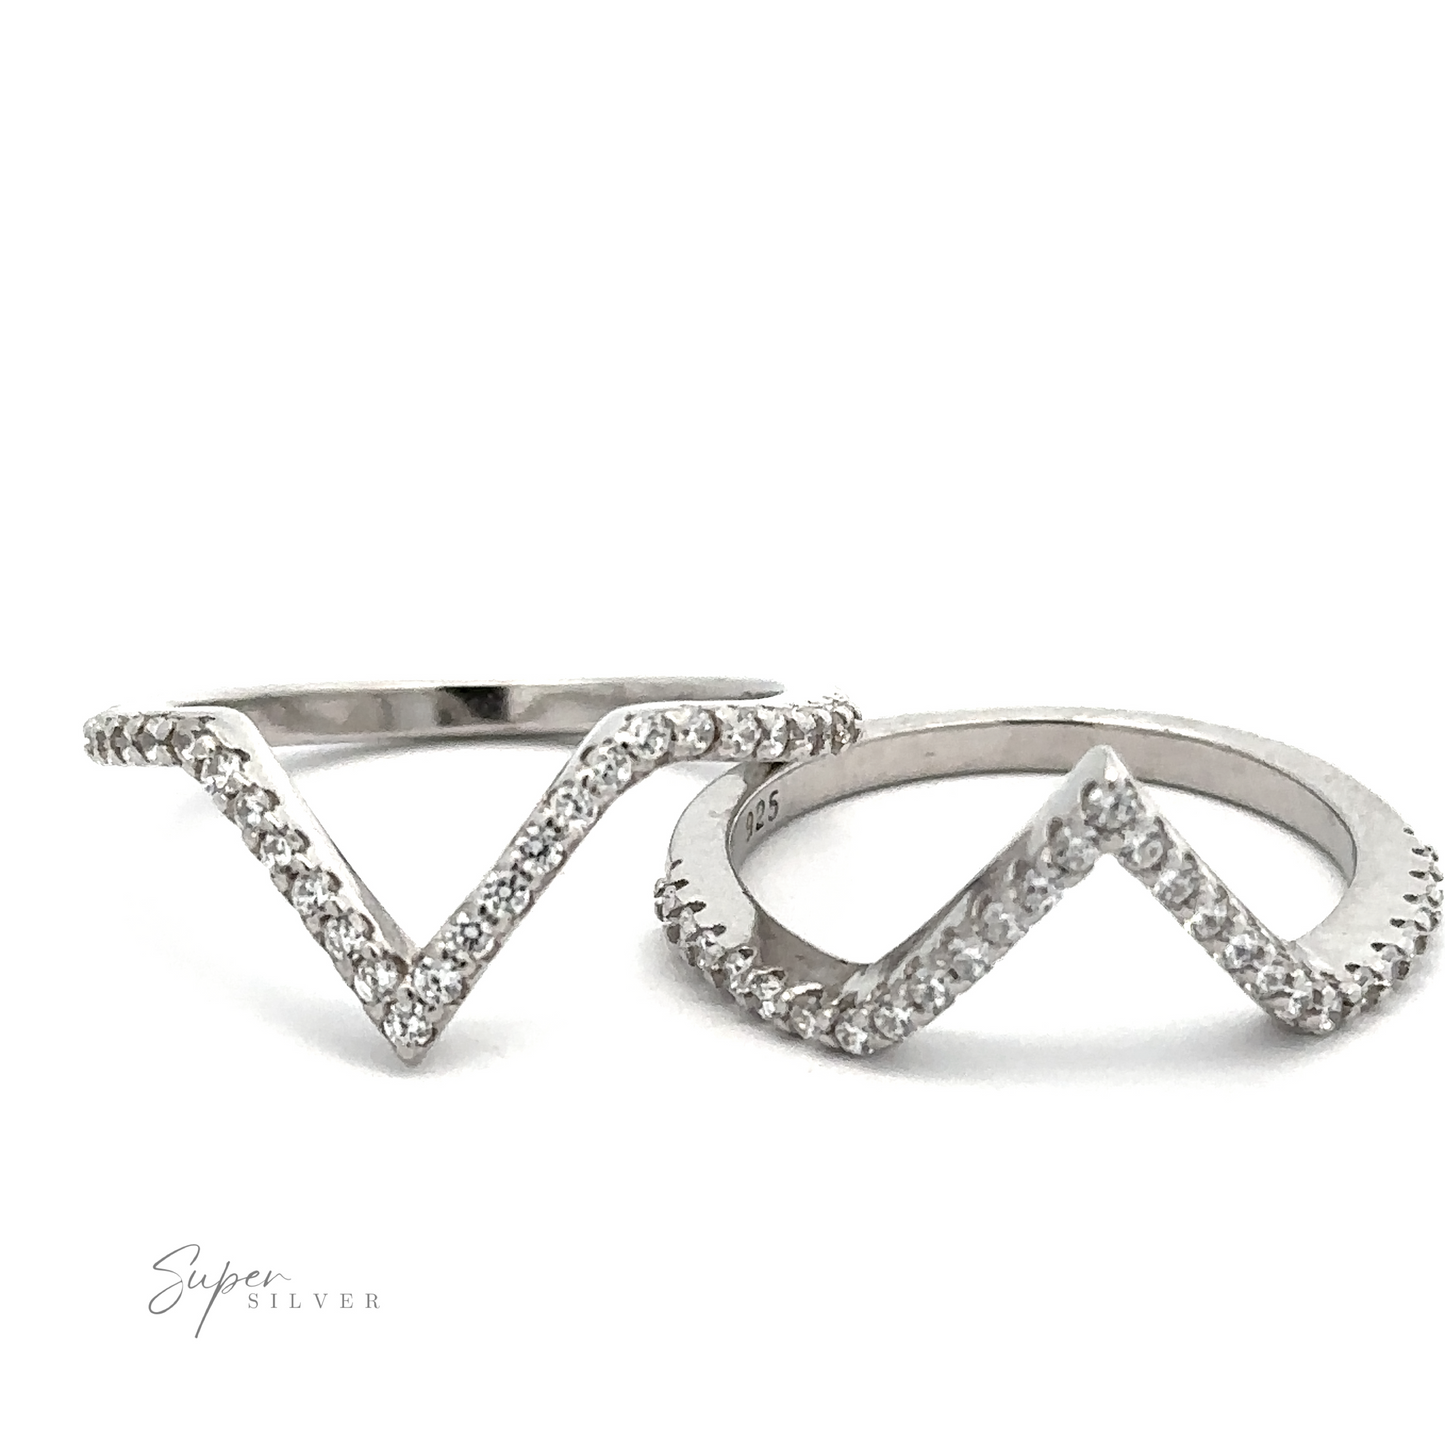 Two silver rings with a chevron design, encrusted with small clear stones in a vintage French pave style, displayed on a white background. "Pave Set Cubic Zirconia Chevron Ring" trademark is visible in the bottom left corner.